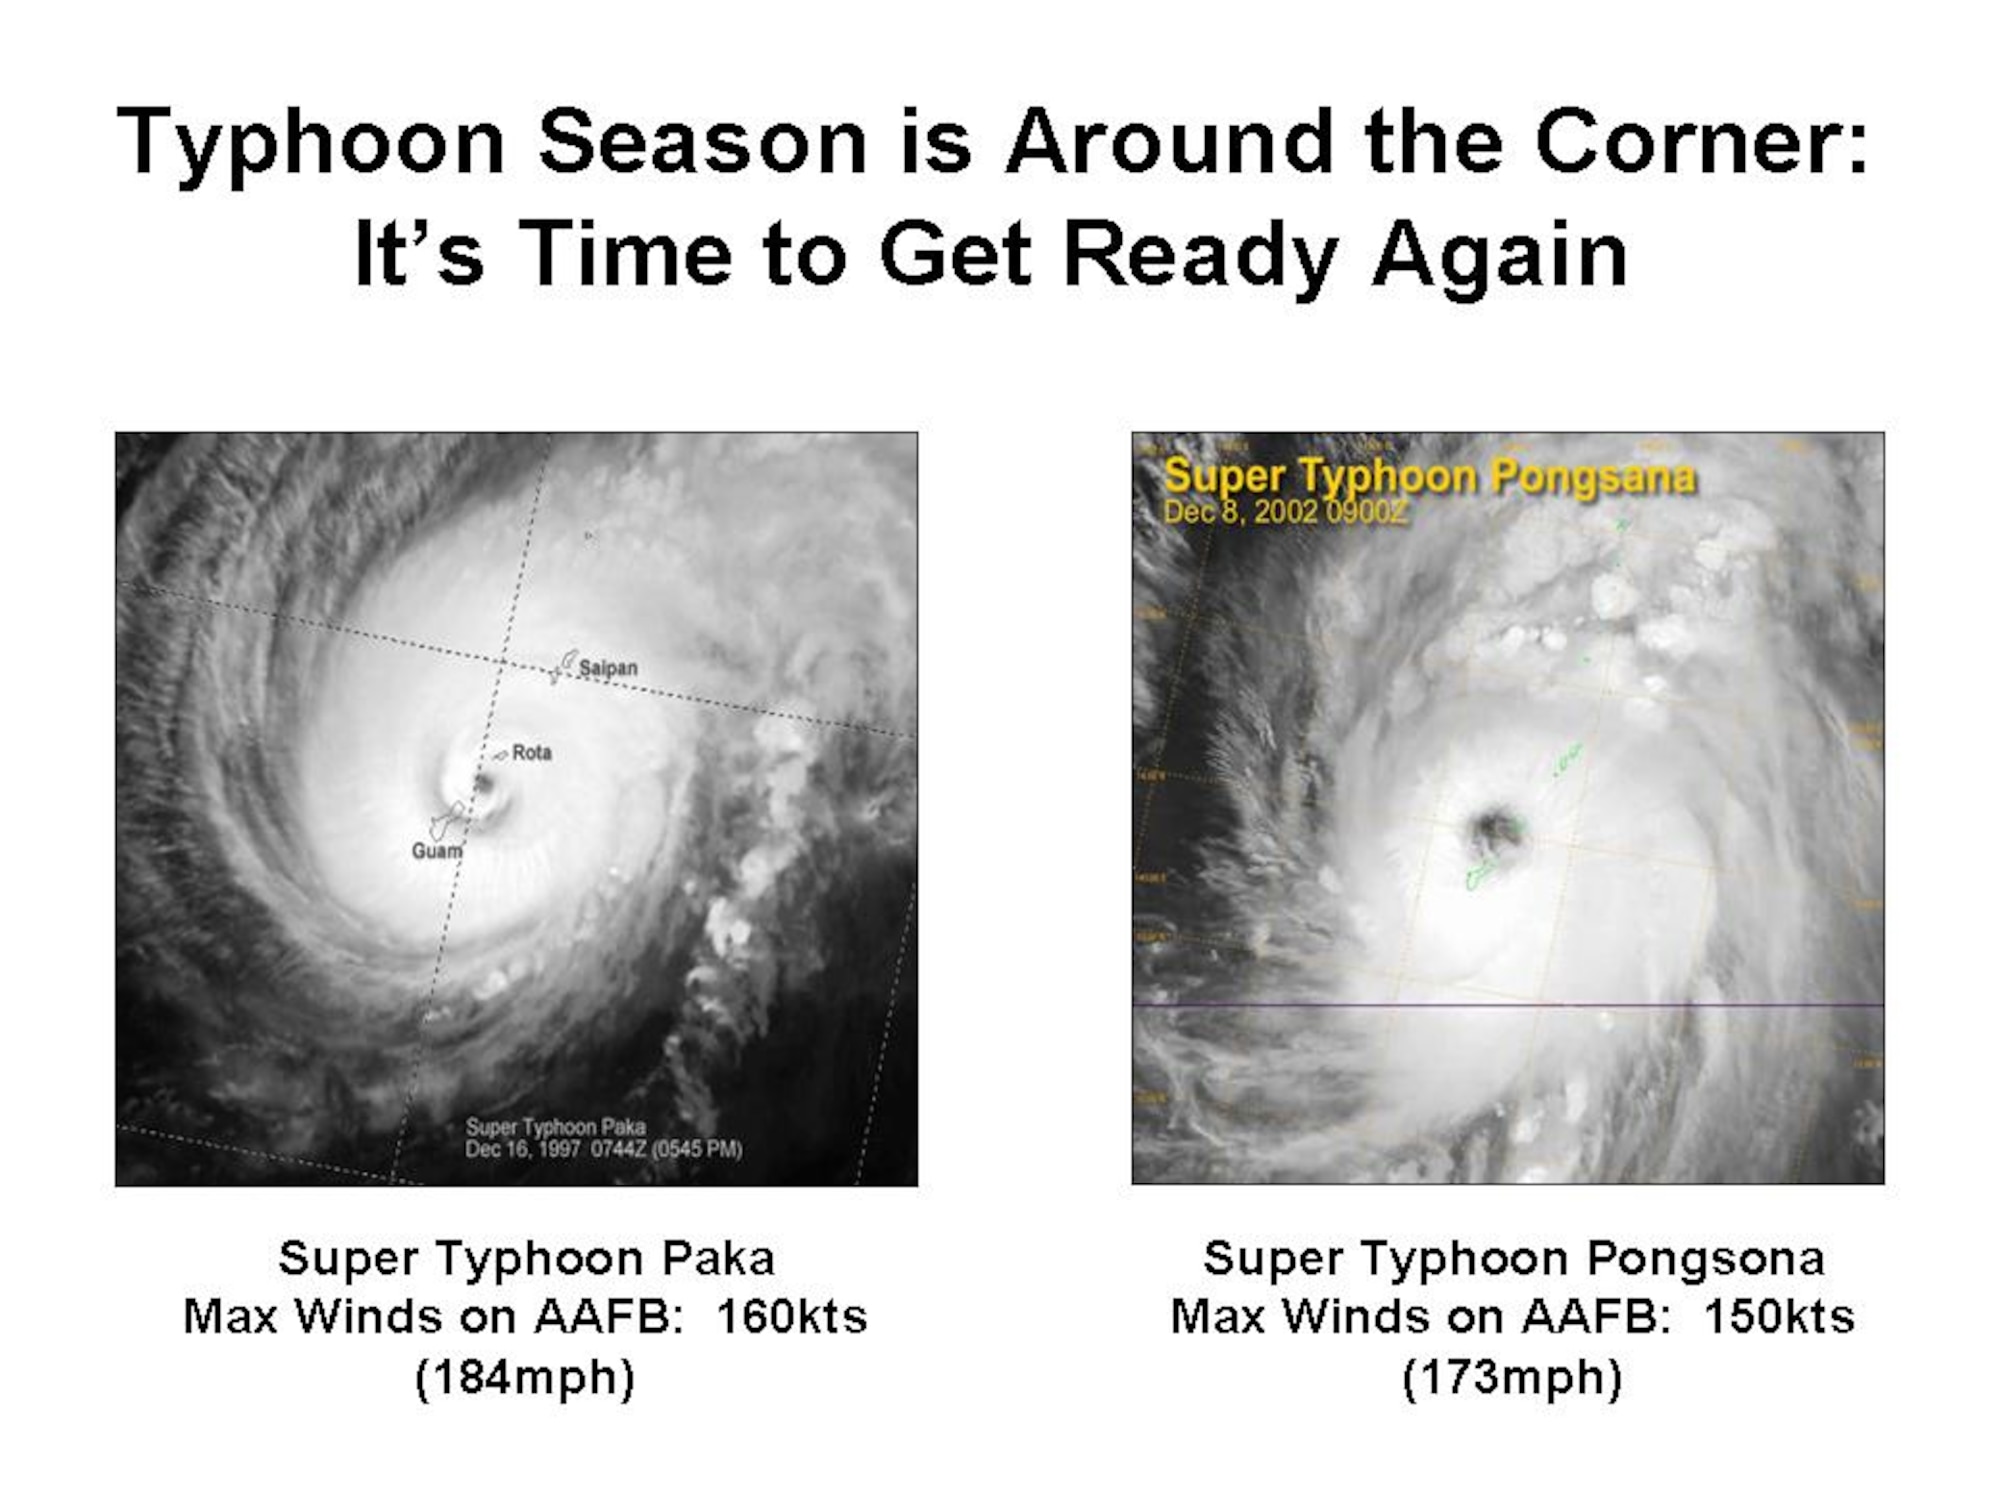 For Guam, tropical storms and typhoons can occur anytime of the year, though a typical typhoon season for Guam runs from late June through December (when Pacific Ocean the water temperatures are at their warmest), with the peak of the typhoon season occurring between late August through mid-November.  